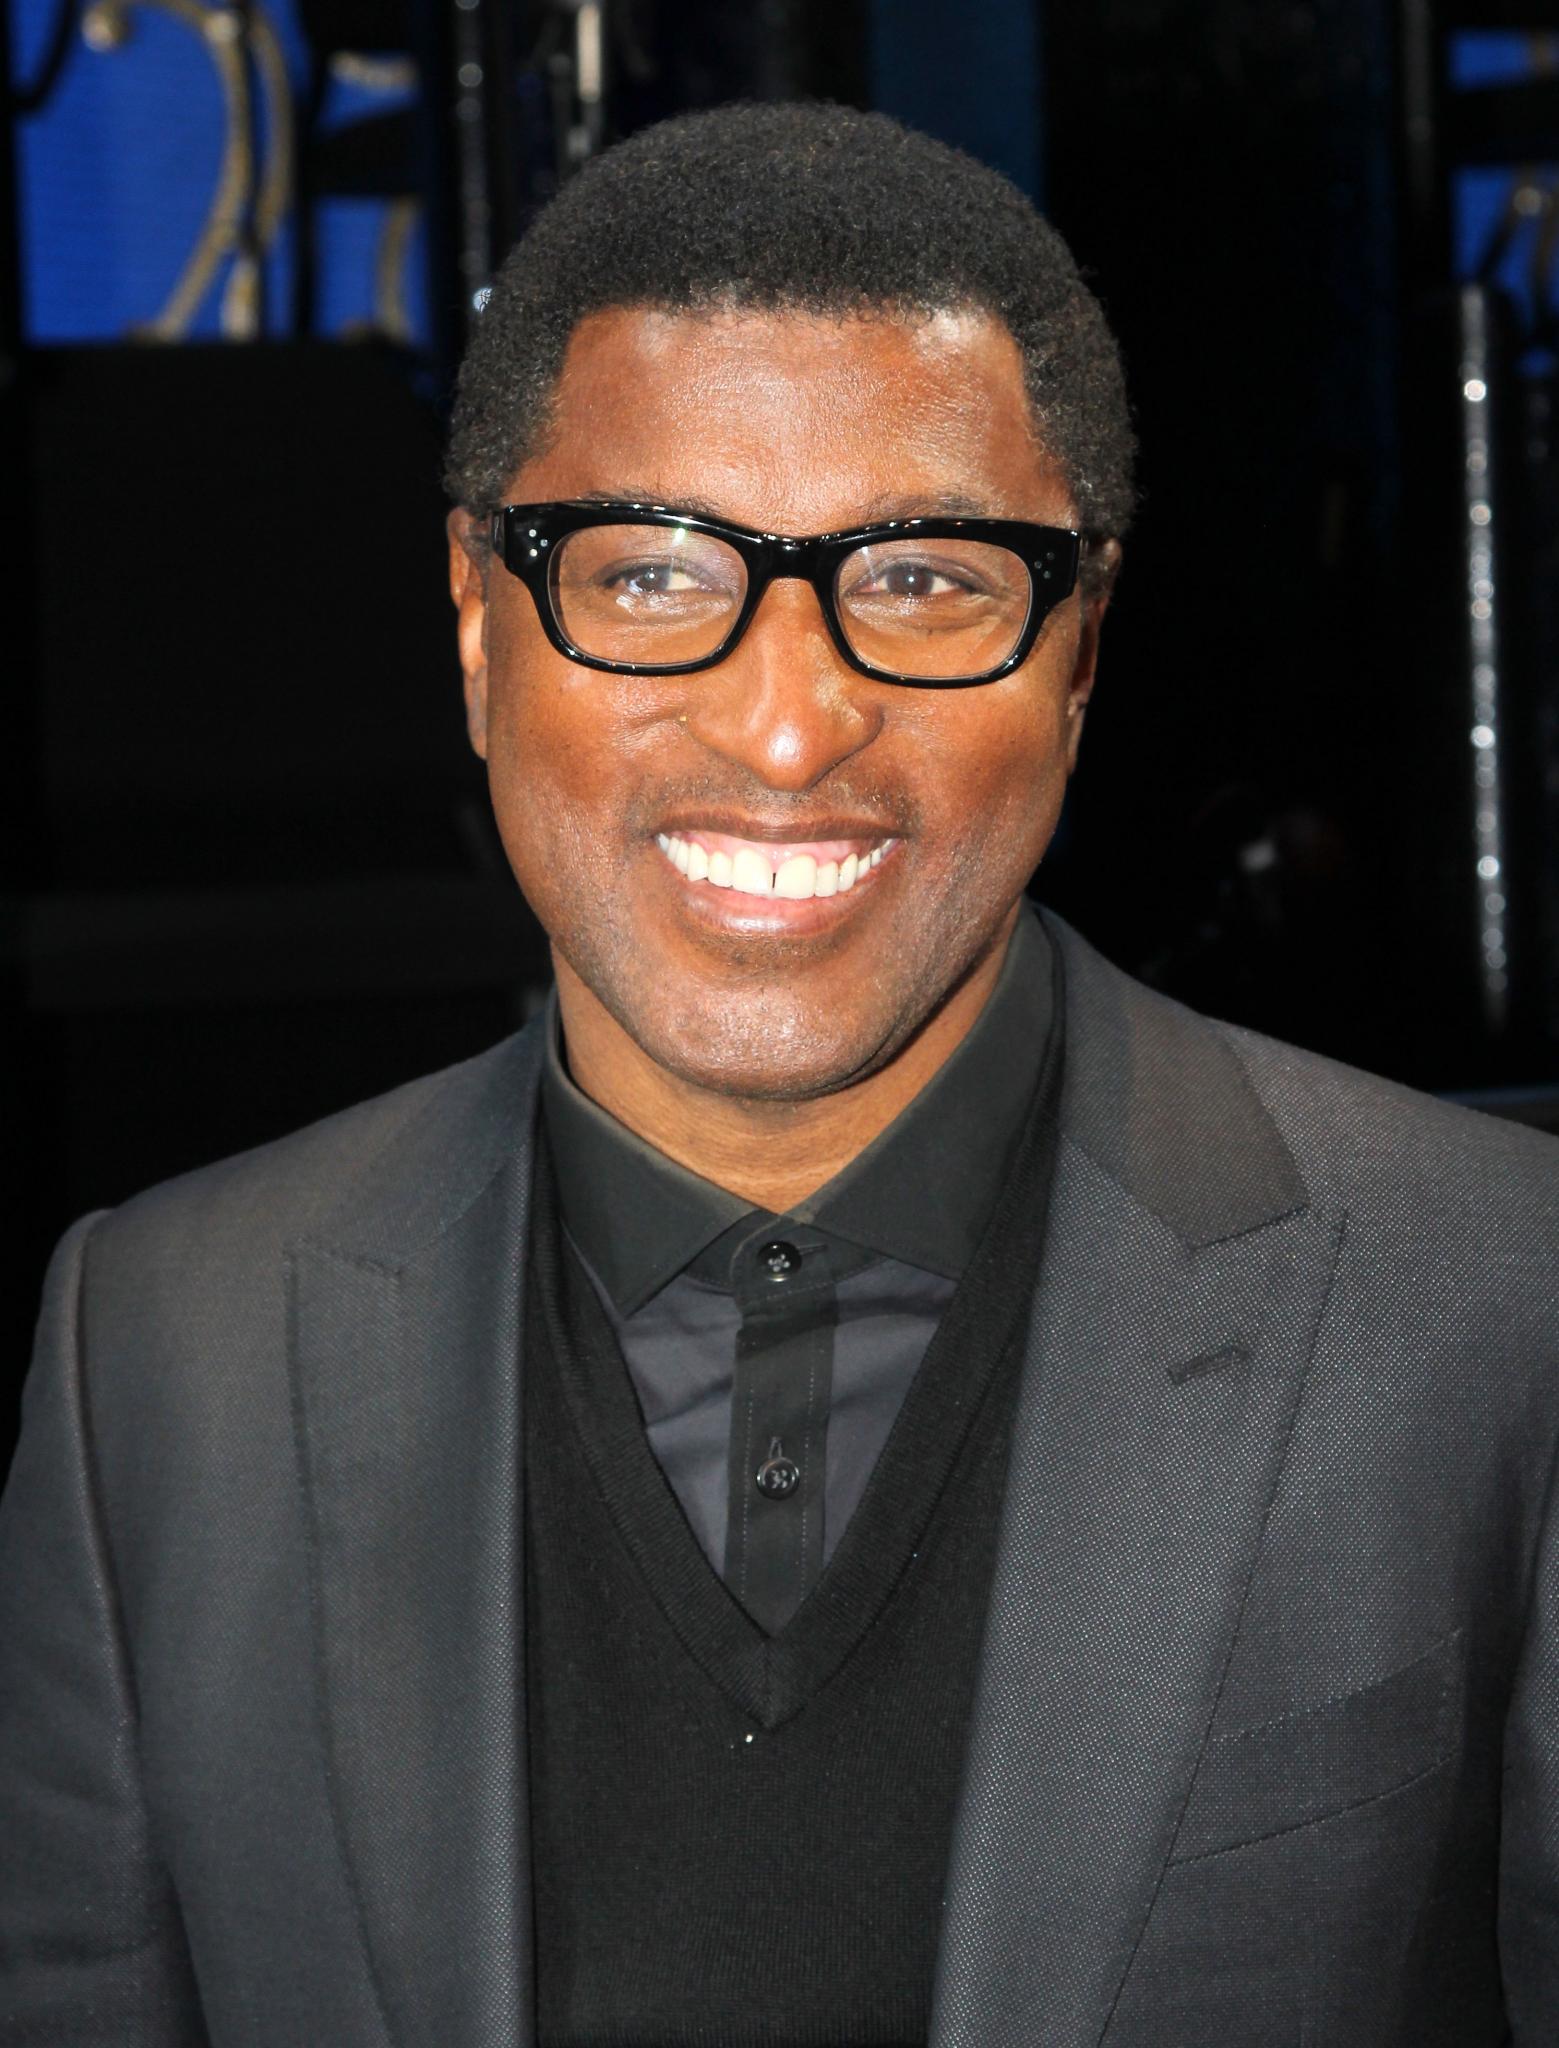 Babyface Talks About the 'Heaven' of Playing at ESSENCE Festival
